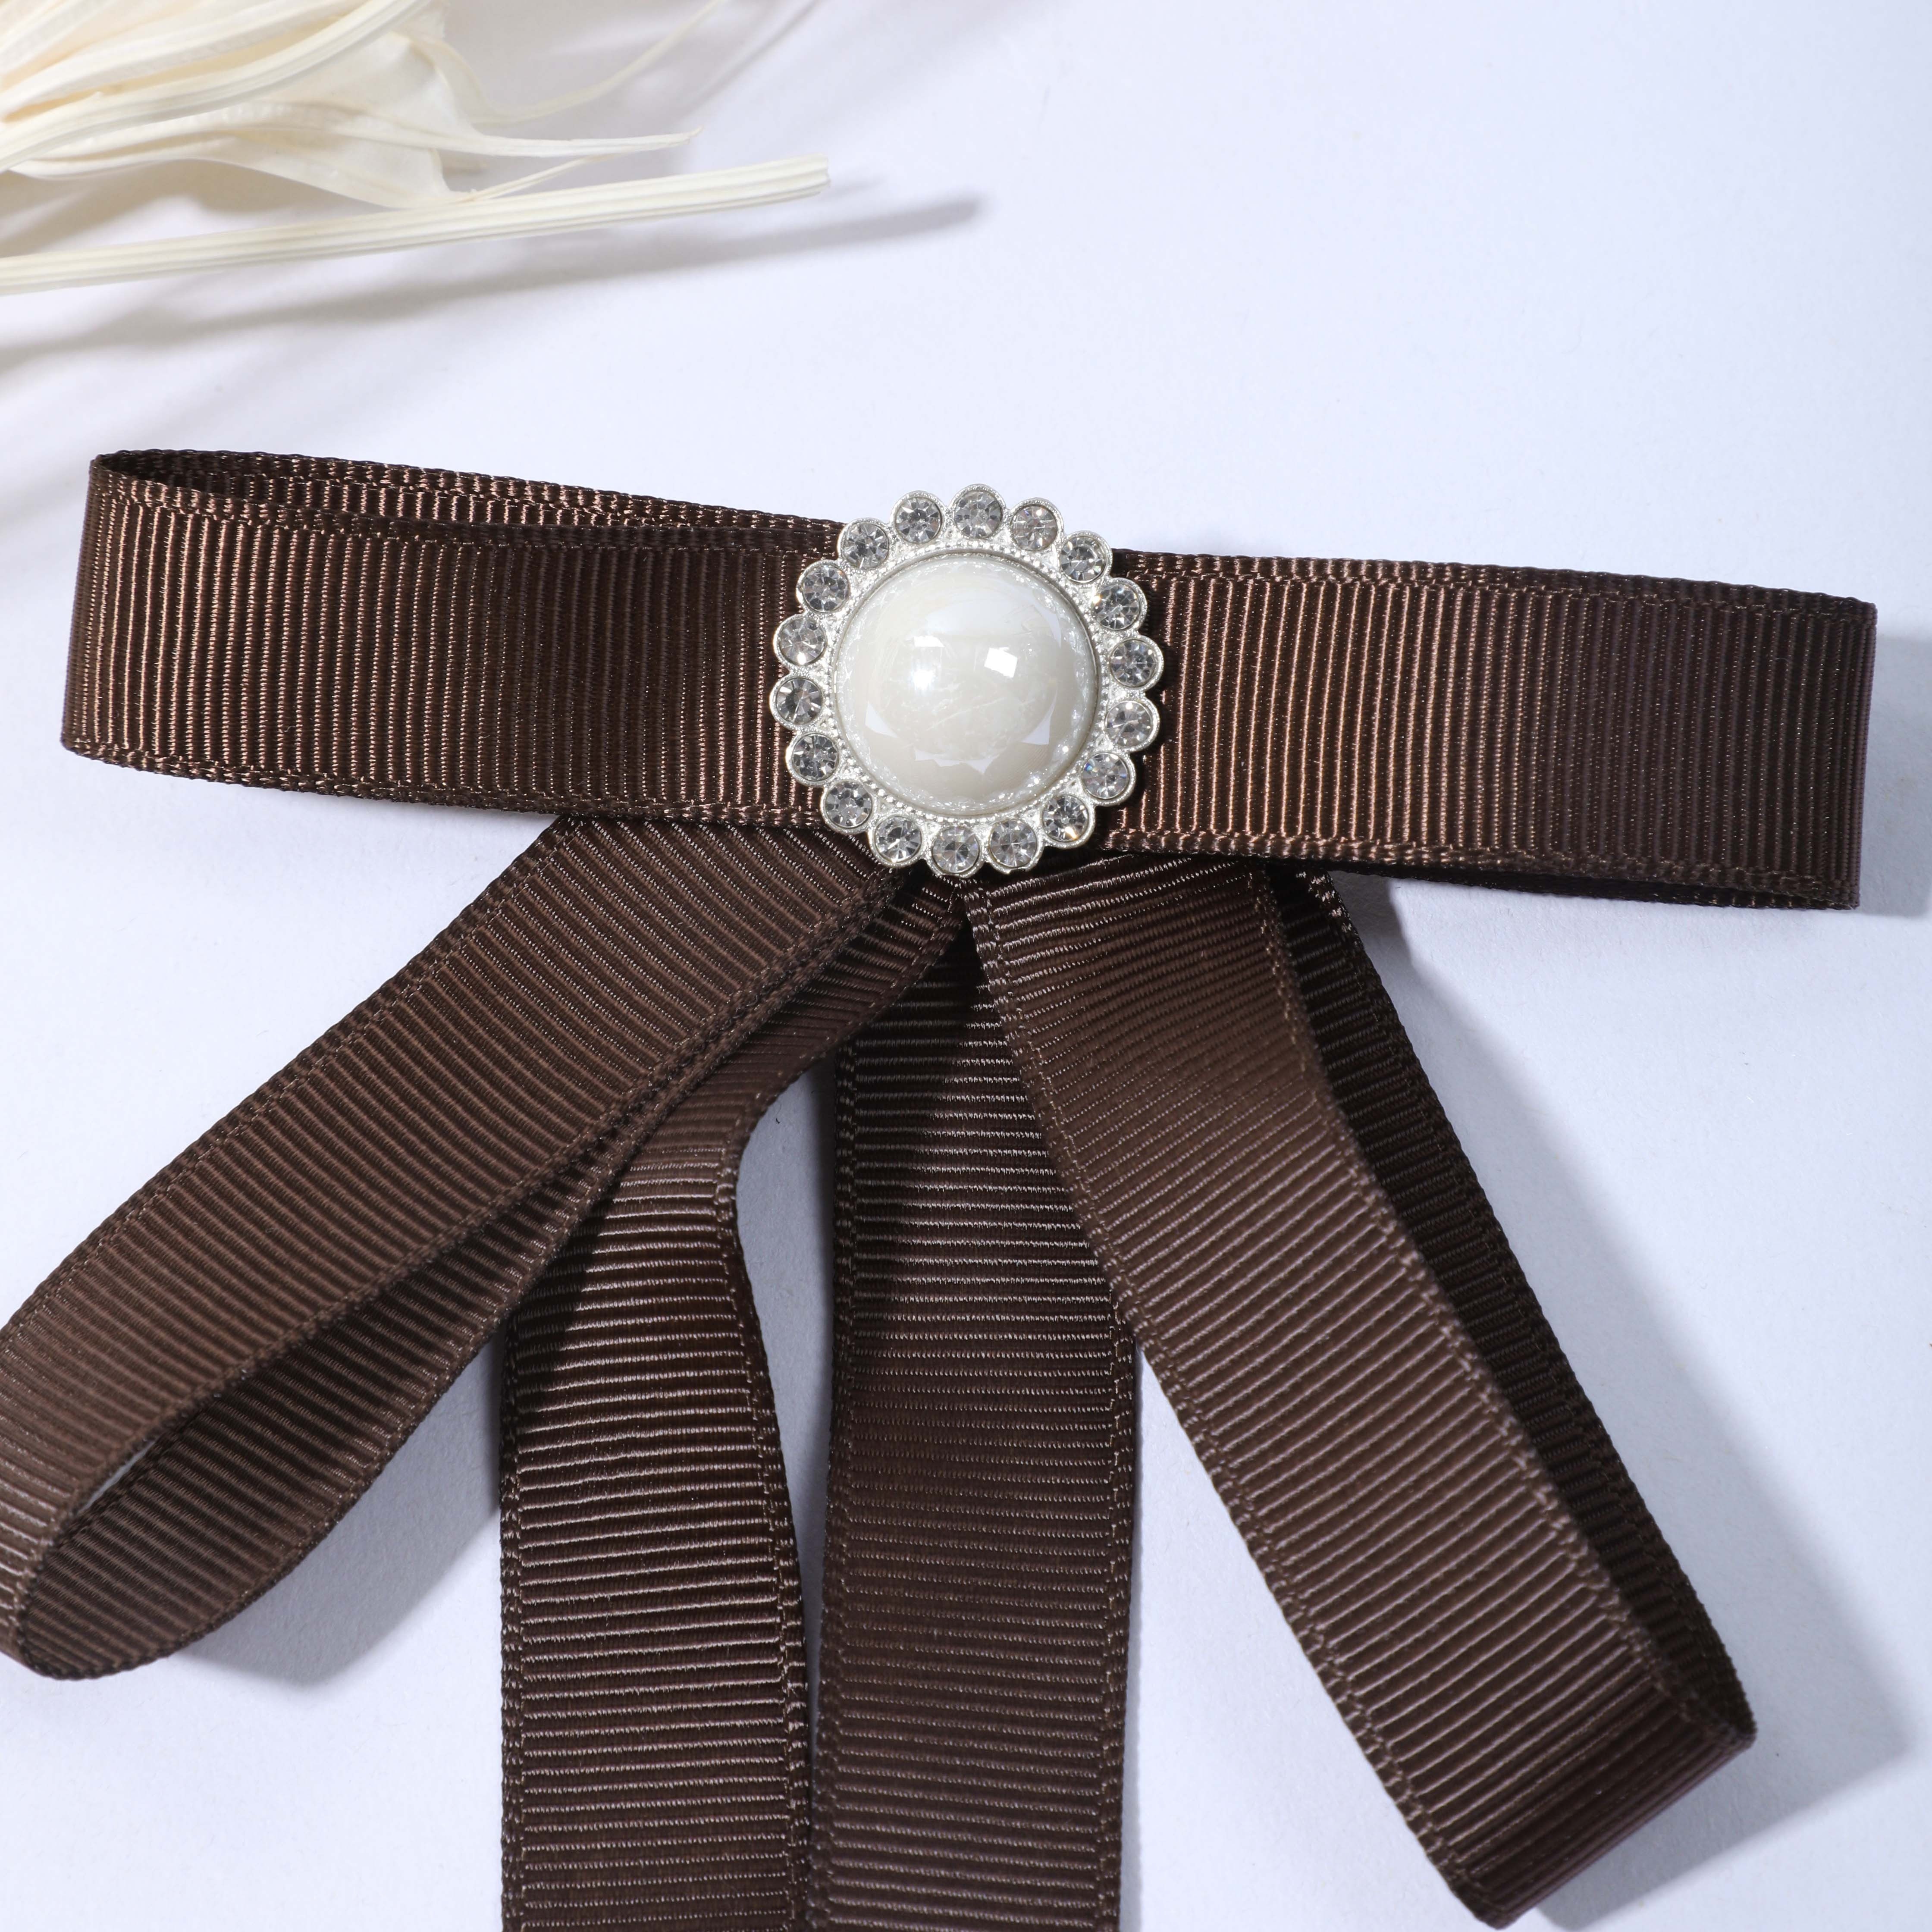 Women Striped Bow Brooch Multilayer Ribbon Brooches Fashion